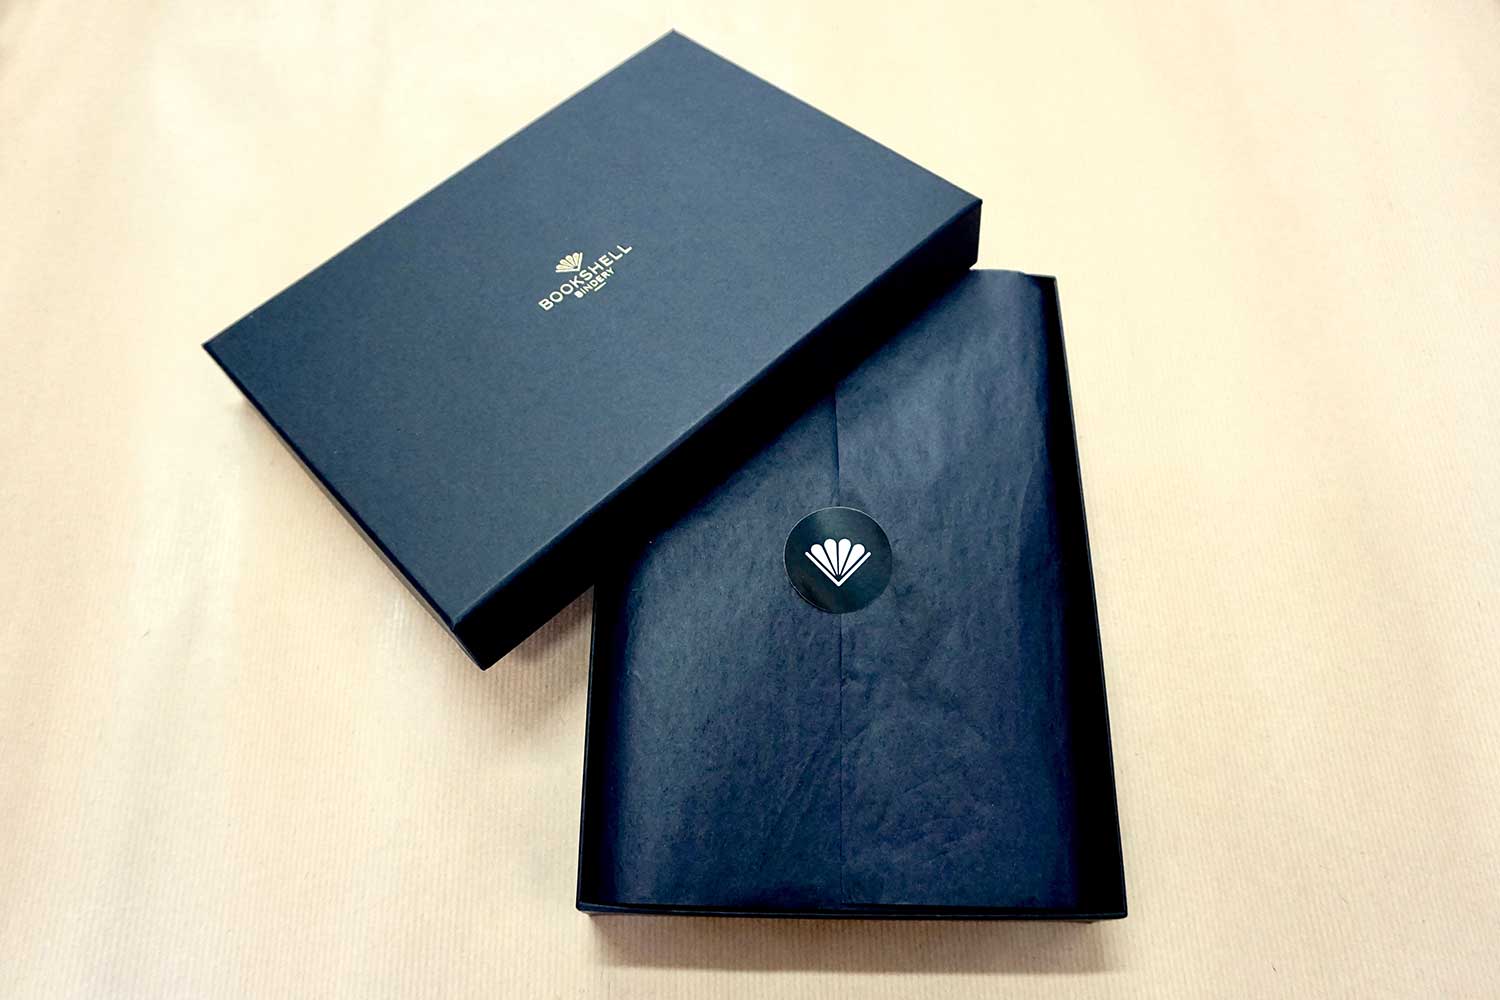 Men's journal ready to gift in beautiful packaging from Bookshell bindery